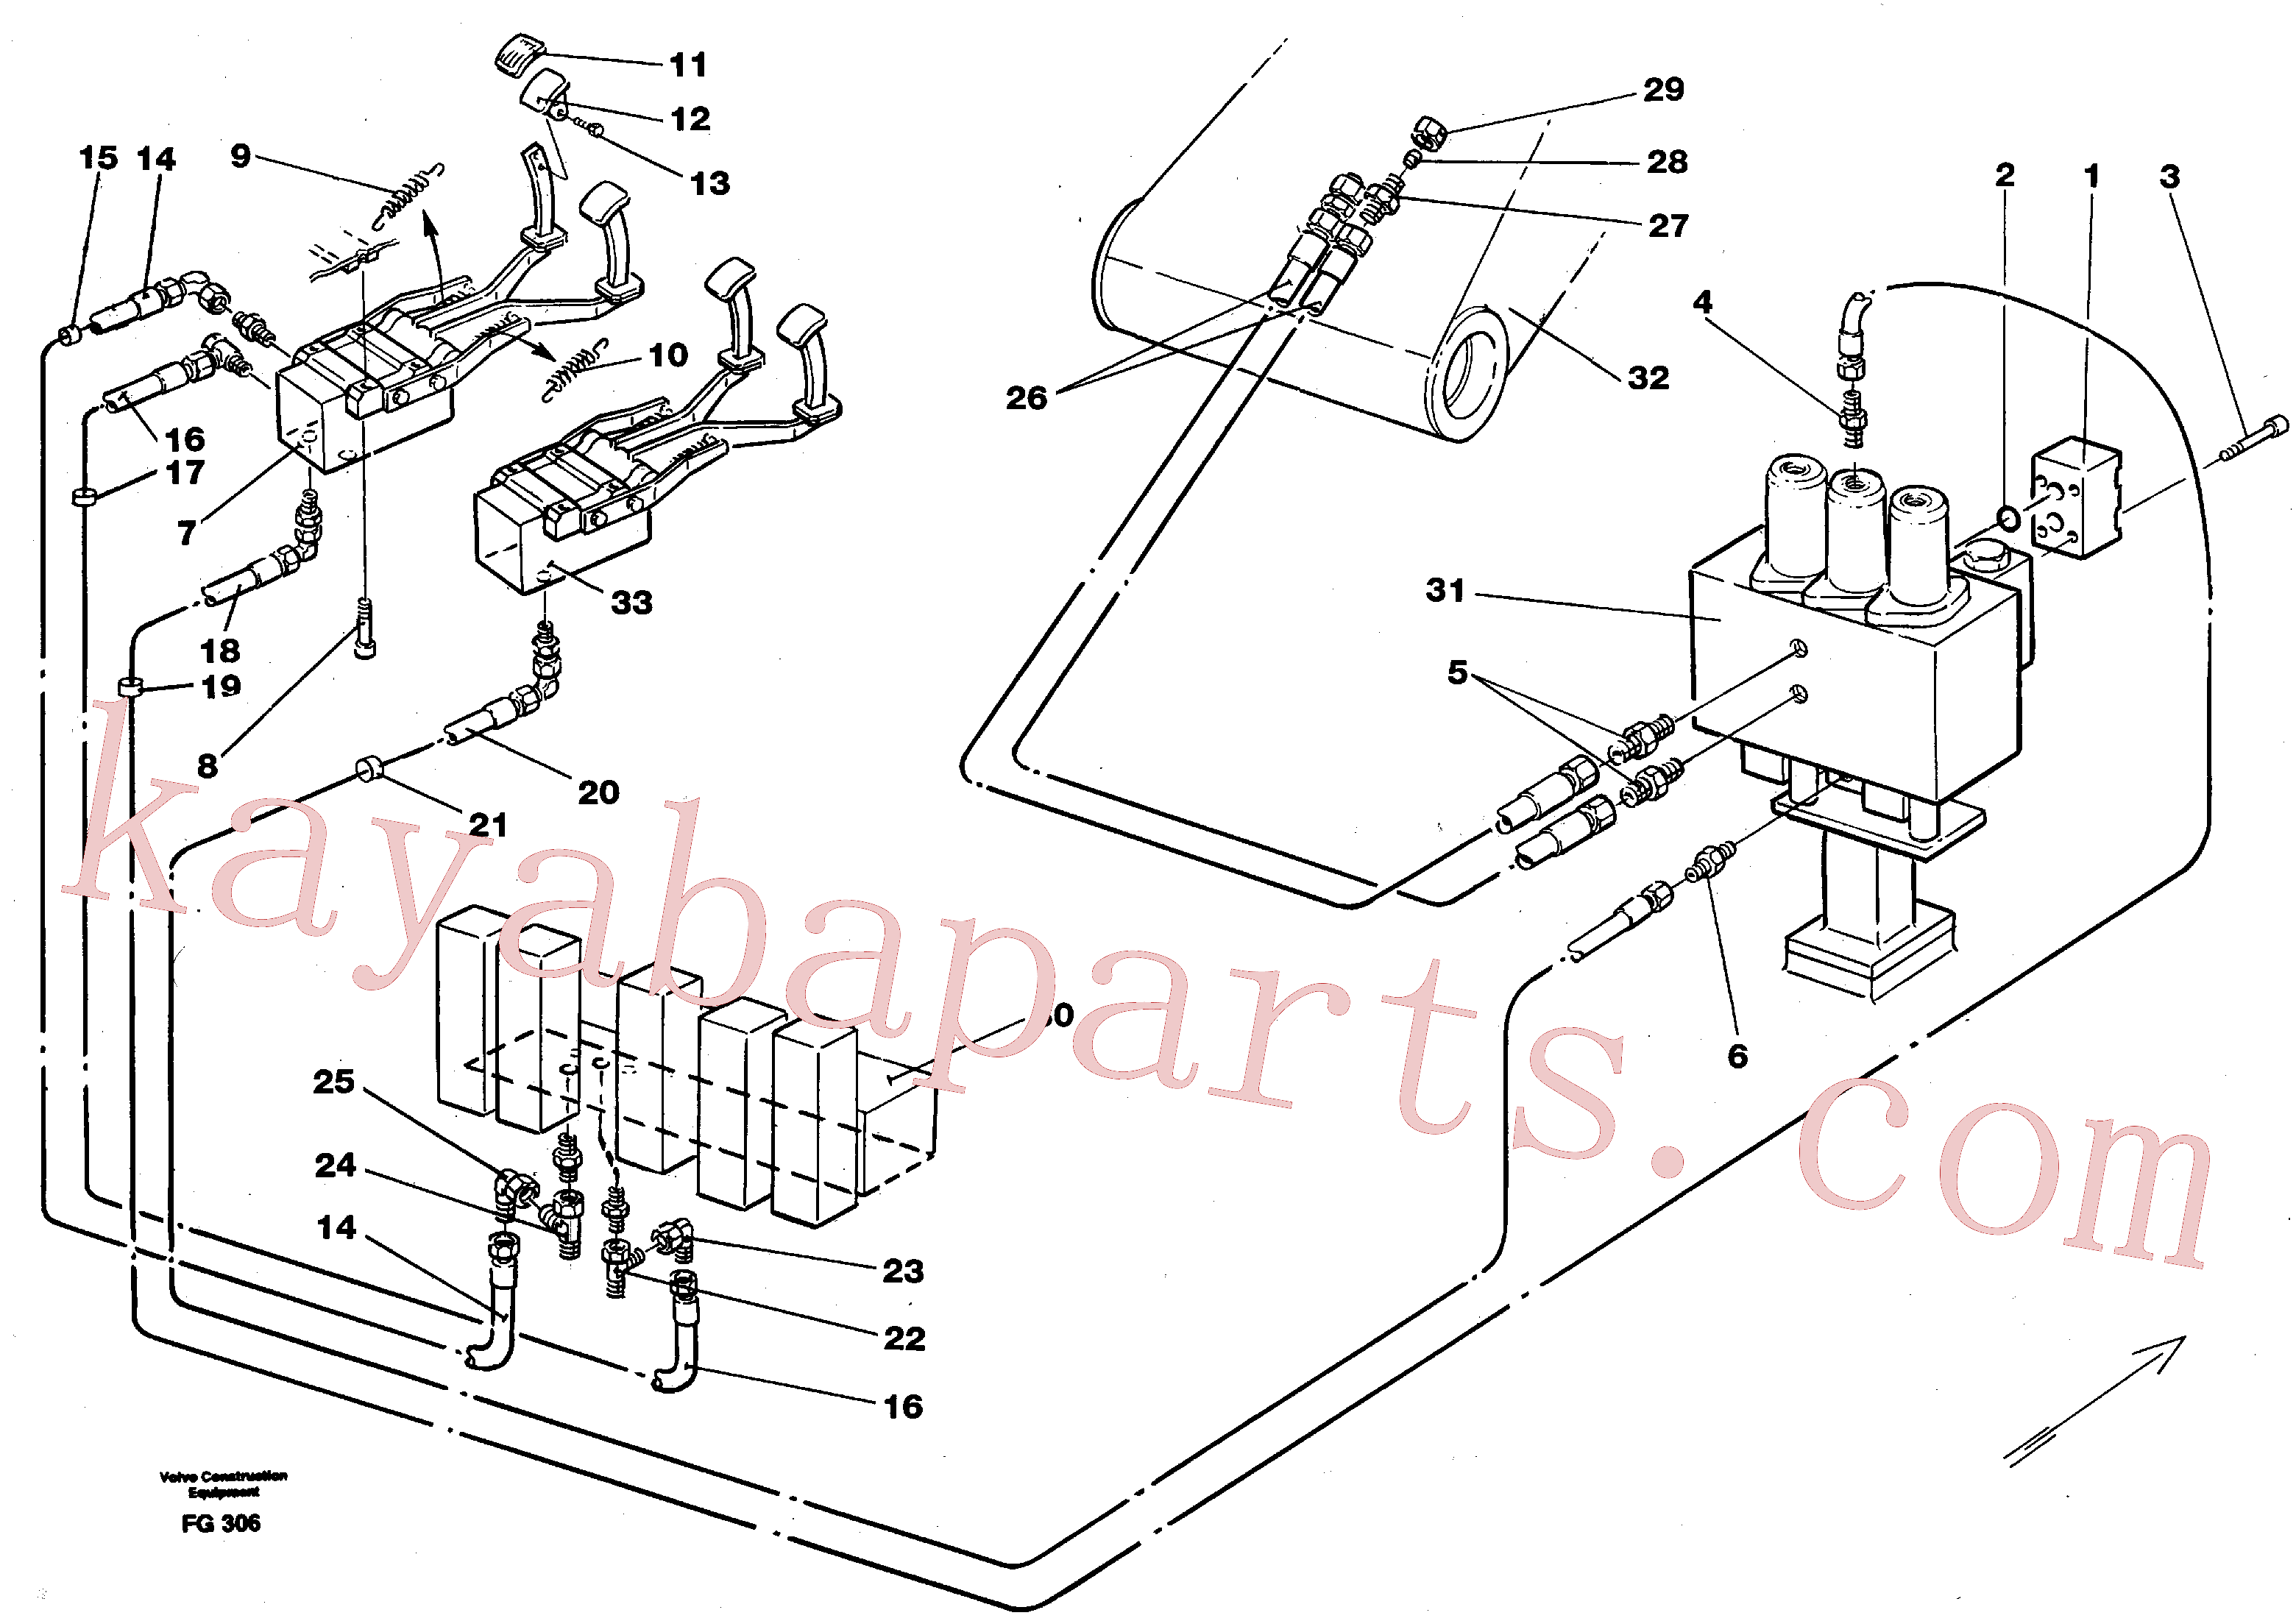 VOE14213151 for Volvo Slope bucket/rotating grab hydraulics in base machine(FG306 assembly)